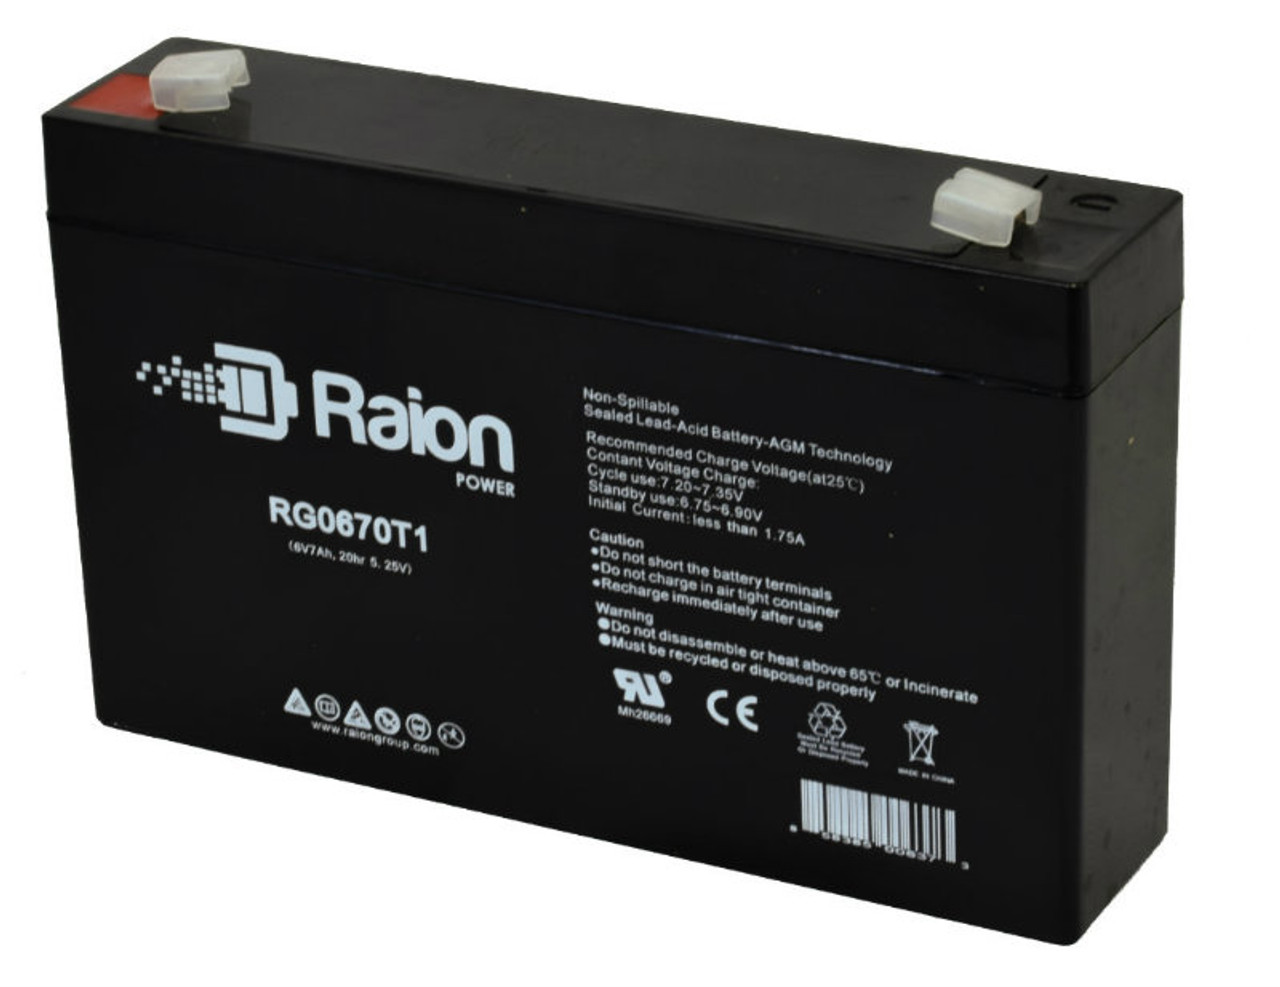 Raion Power RG0670T1 Replacement Battery for Sonnenschein 100001164 OEM Battery